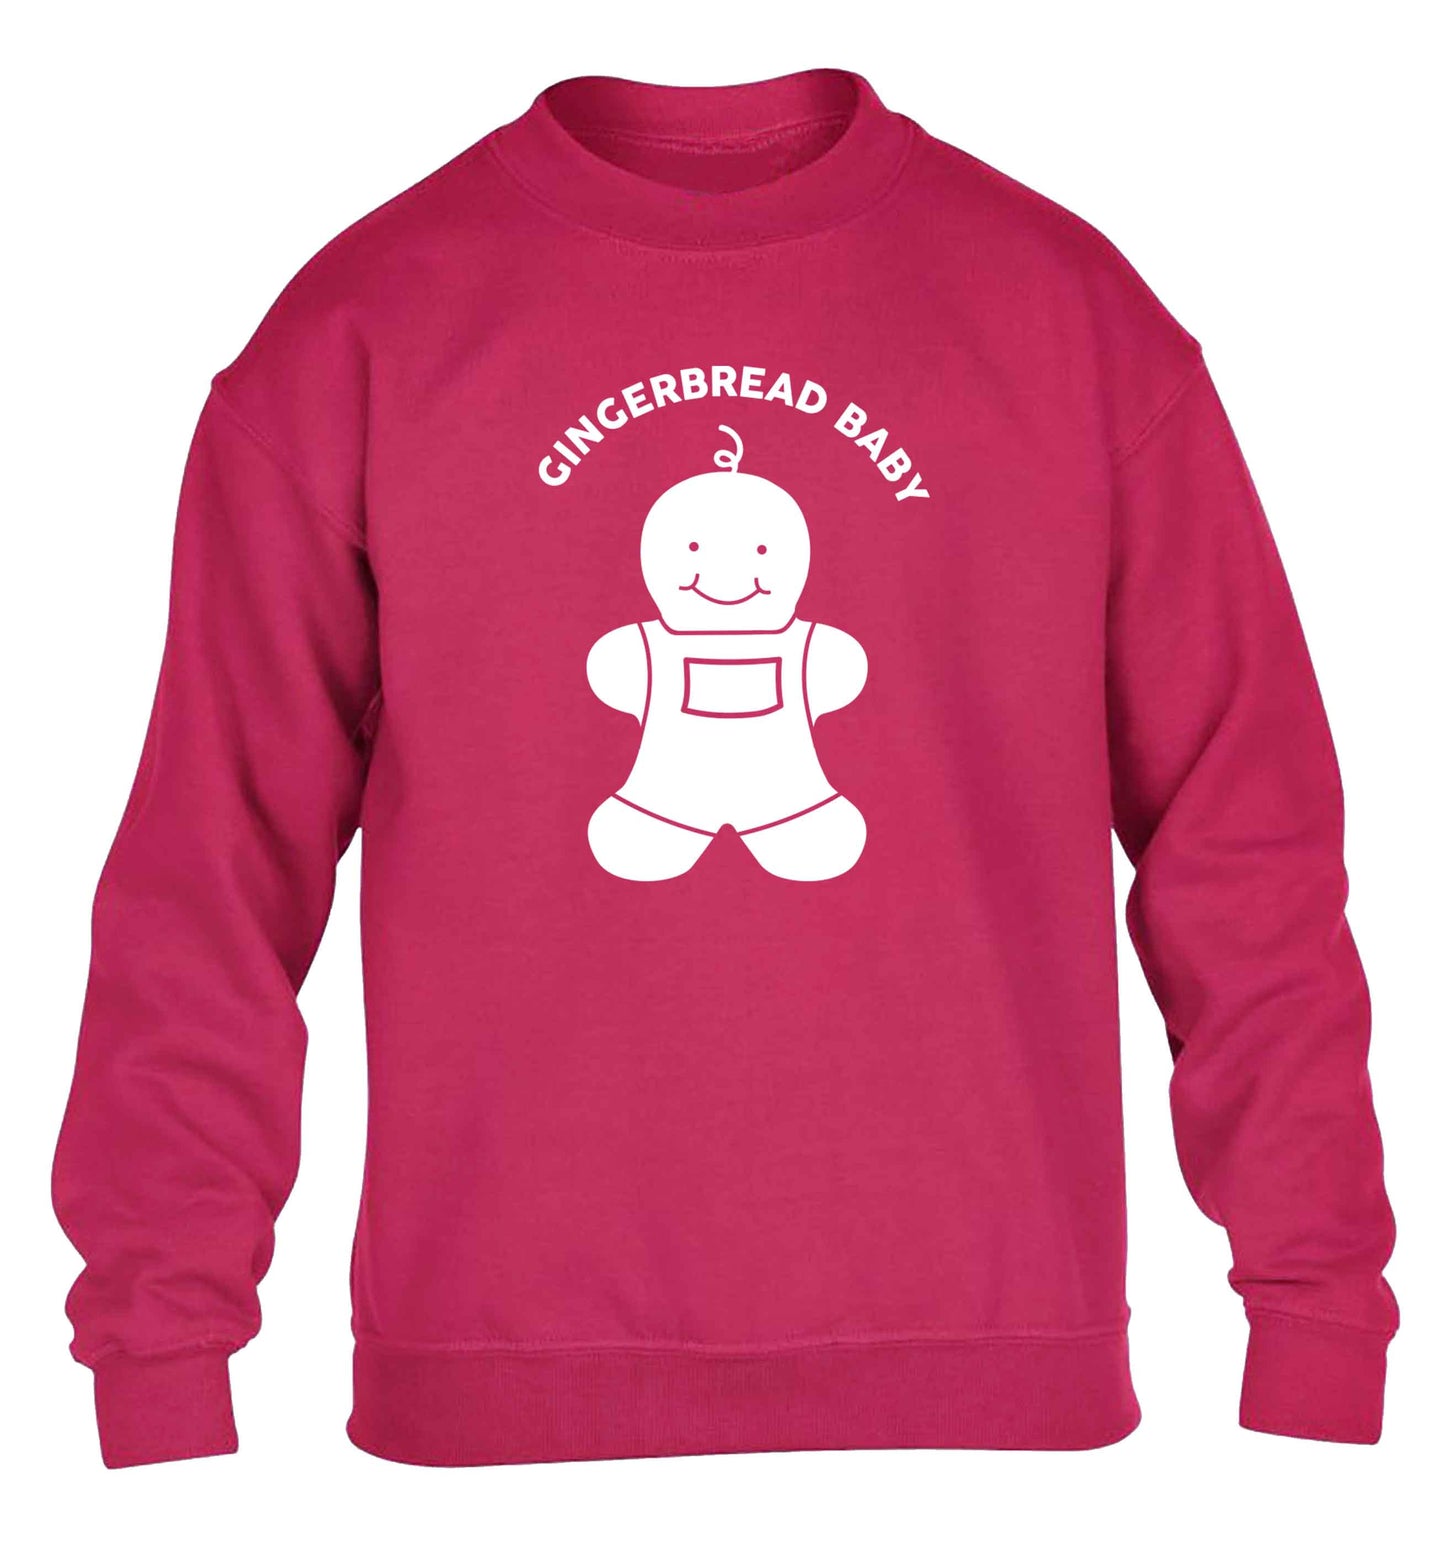 Gingerbread baby children's pink sweater 12-13 Years